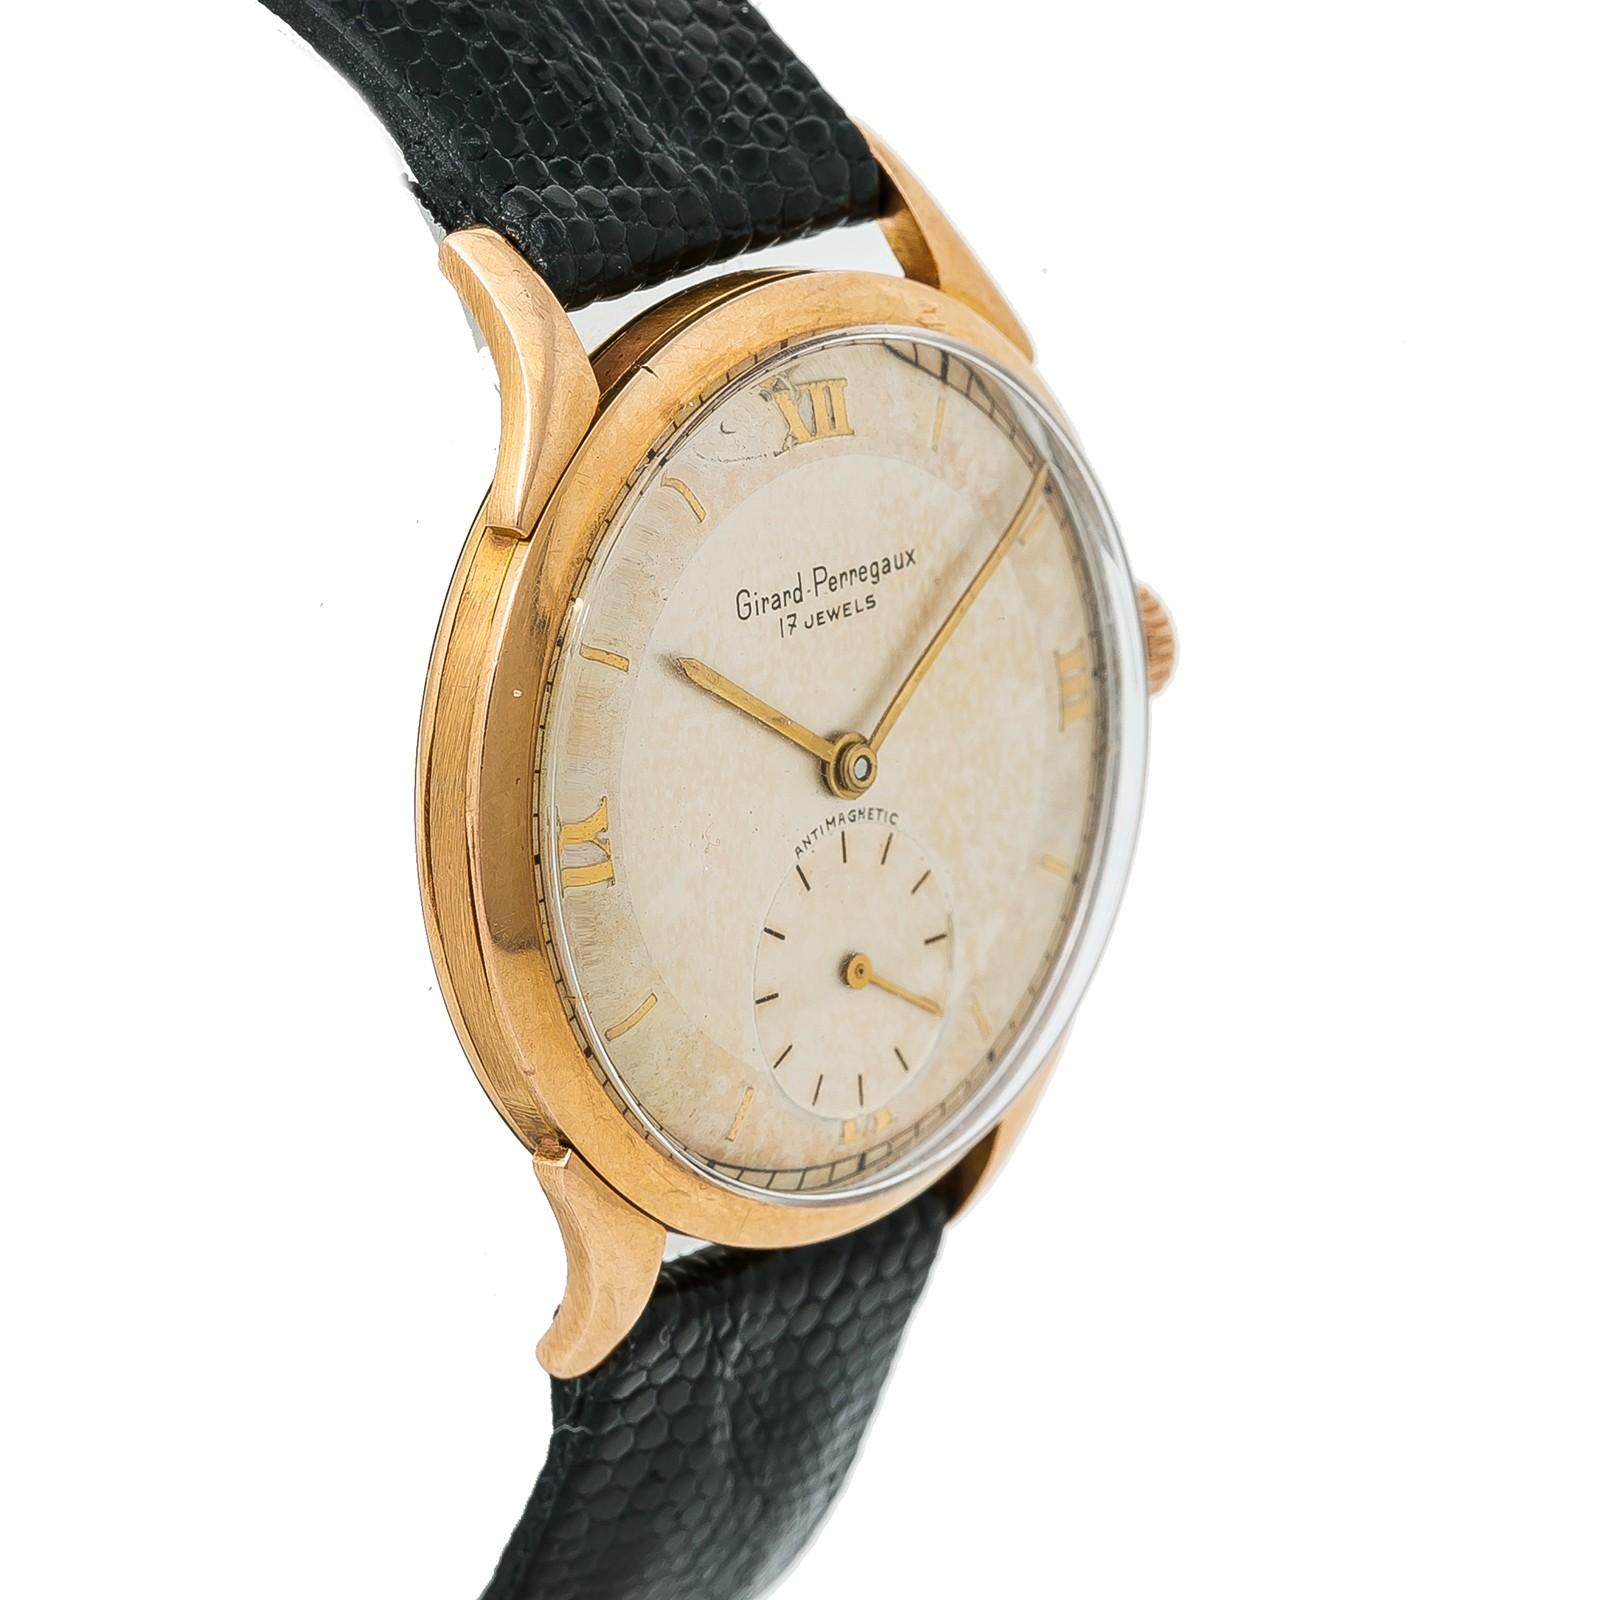 Contemporary Certified: Girard Perregaux 17 Jewels Antimagnetic Mens Automatic Watch